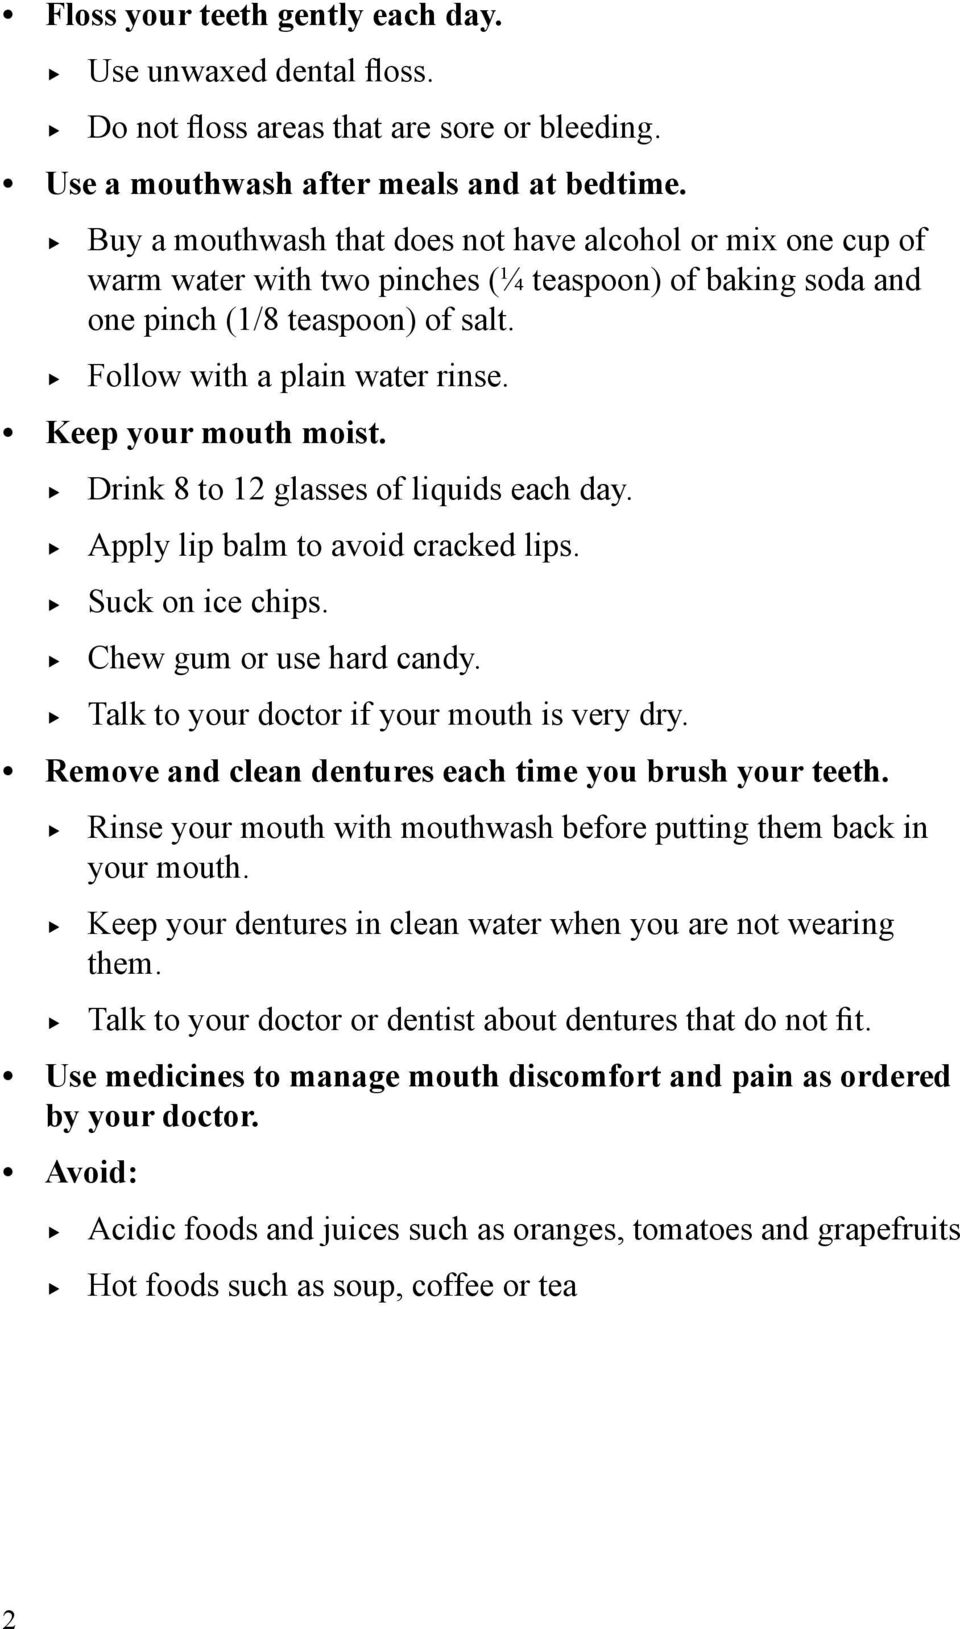 Keep your mouth moist. Drink 8 to 12 glasses of liquids each day. Apply lip balm to avoid cracked lips. Suck on ice chips. Chew gum or use hard candy. Talk to your doctor if your mouth is very dry.